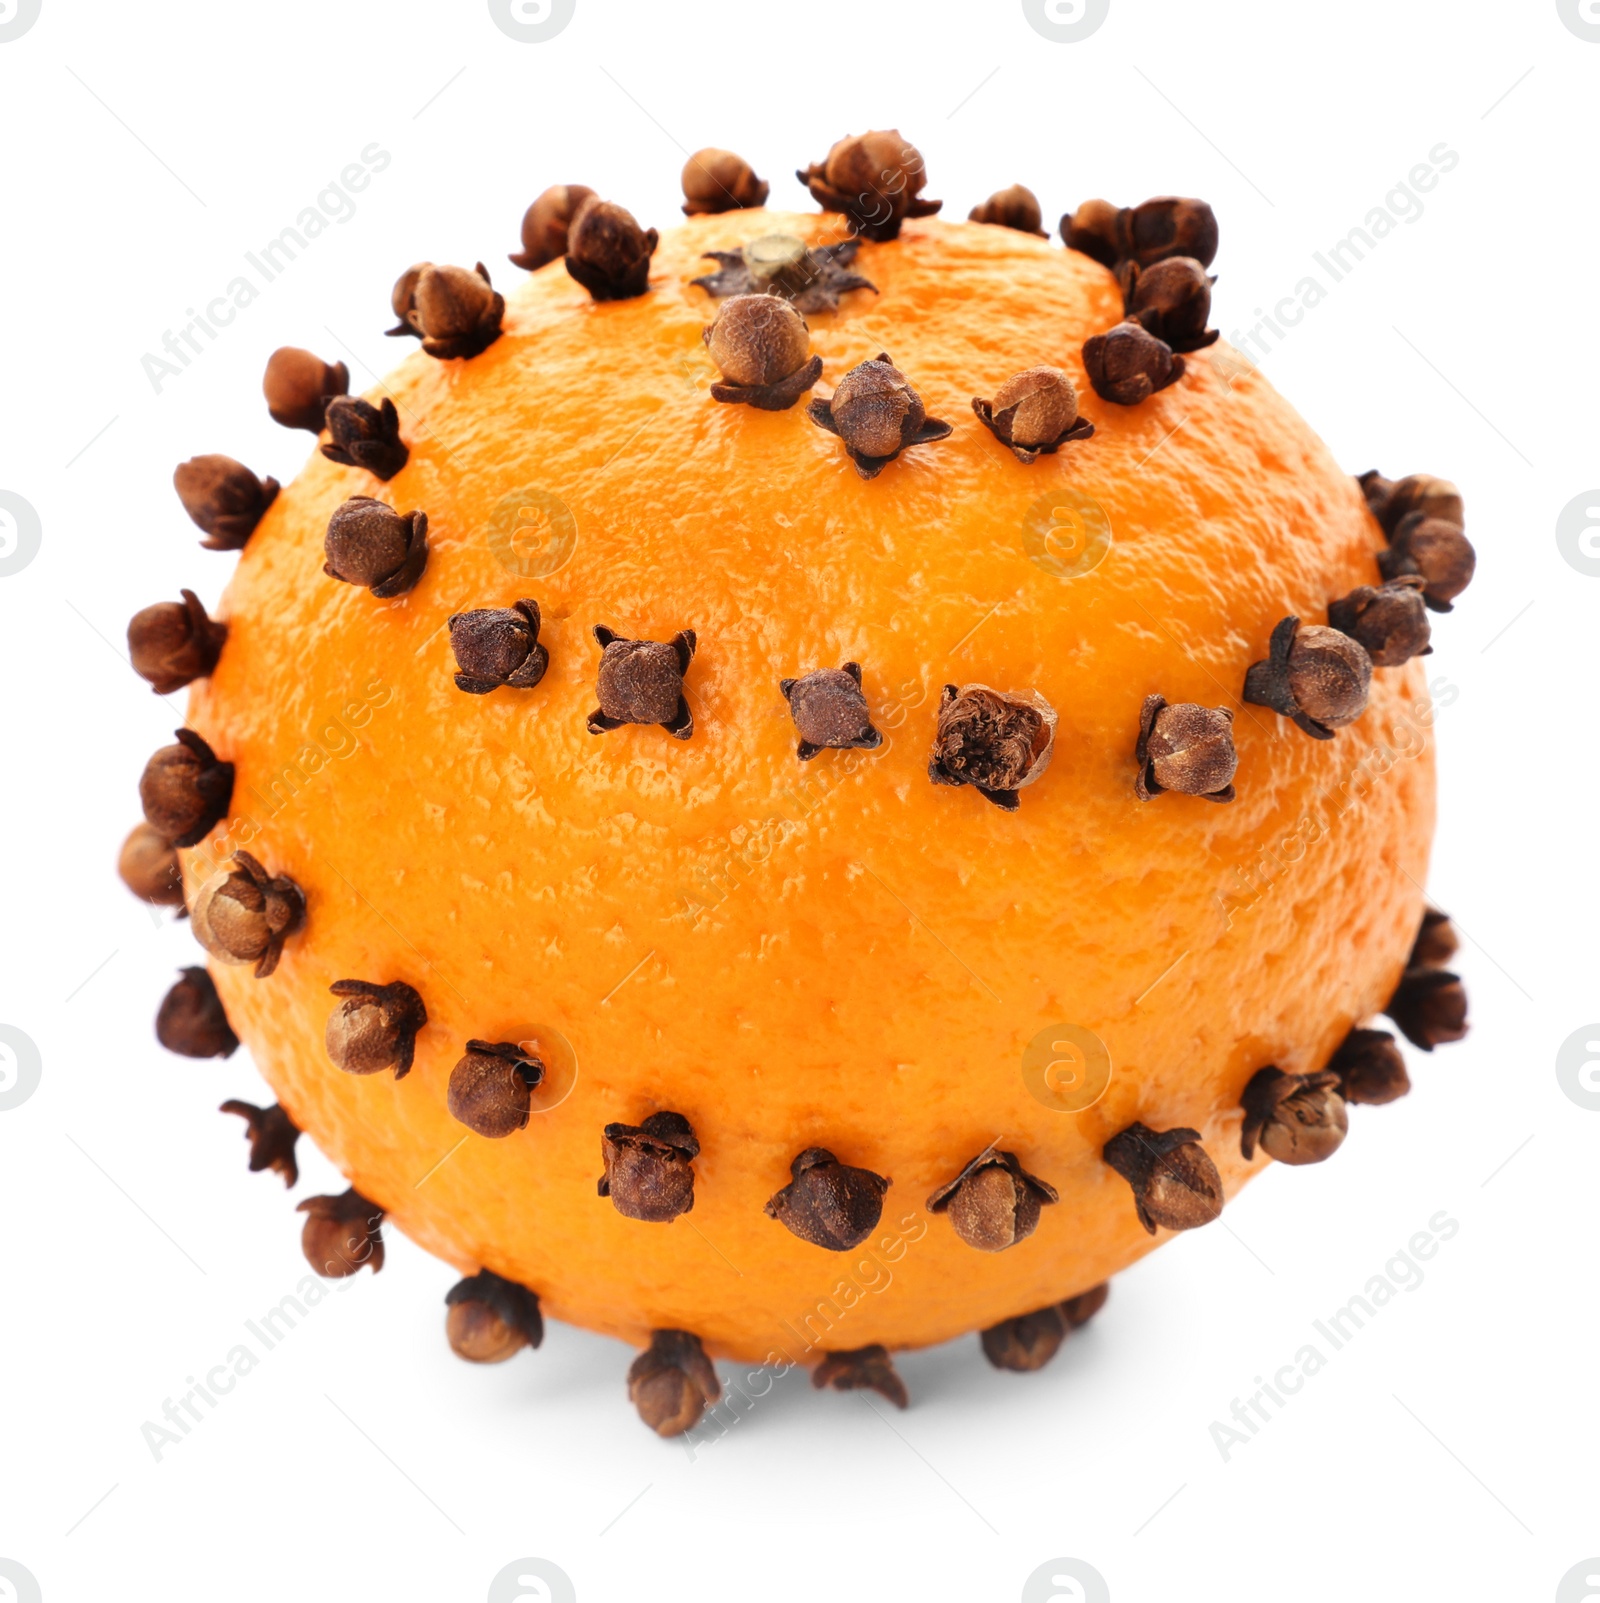 Photo of Pomander ball made of tangerine with cloves isolated on white